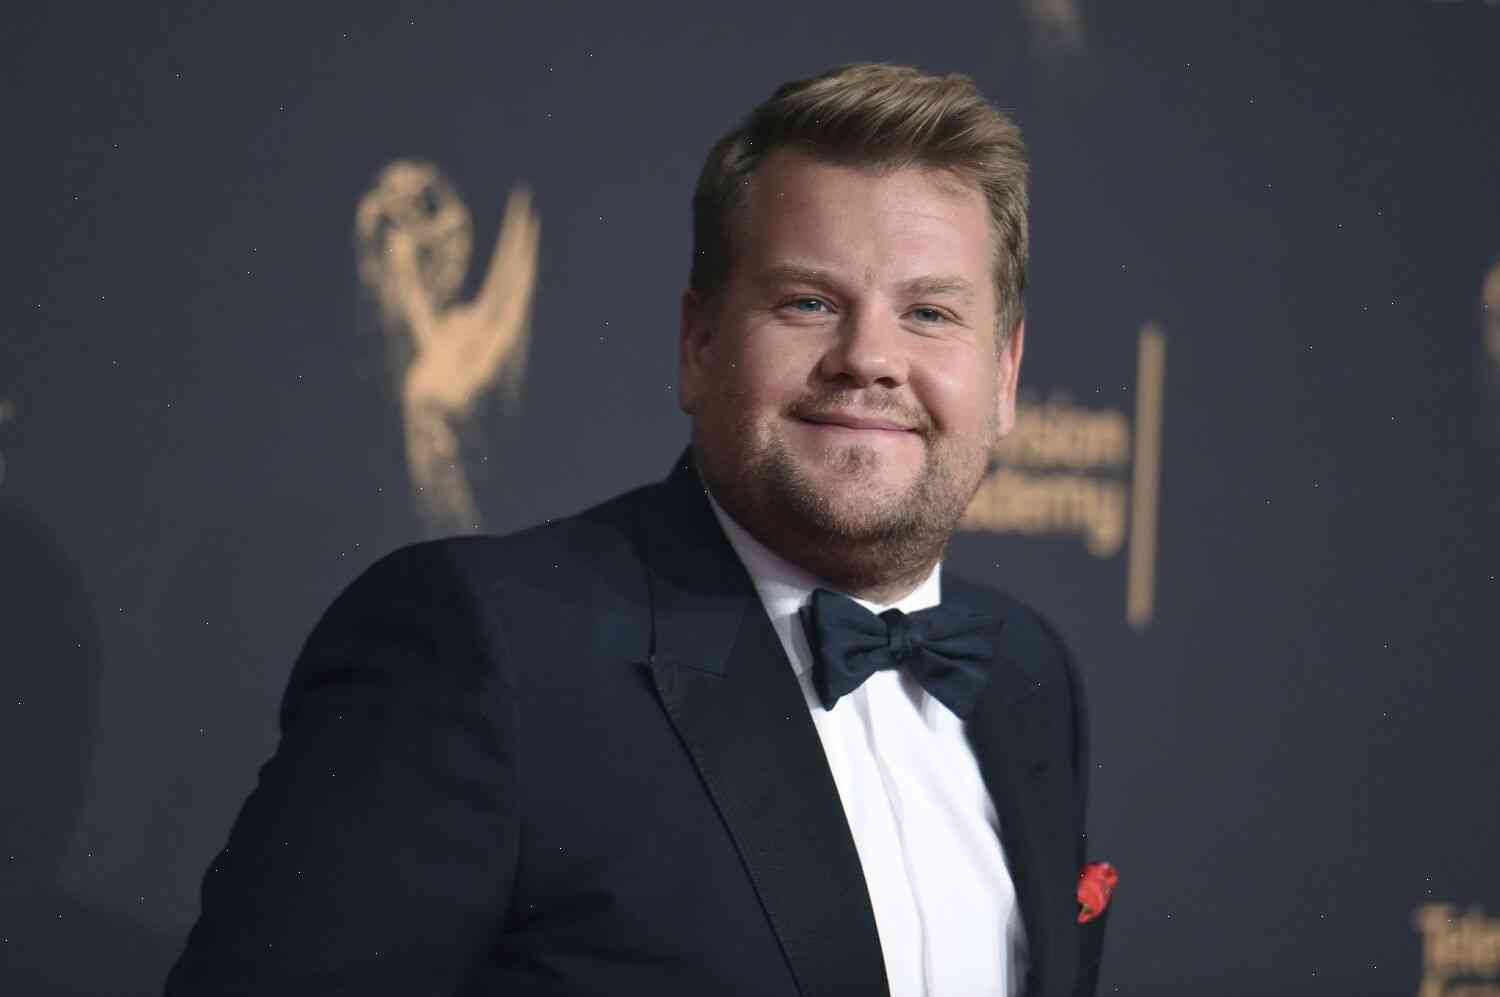 Annie's Restaurant Bans James Corden After he Calls It a 'Fairytale' and 'Worse Than An Airport'